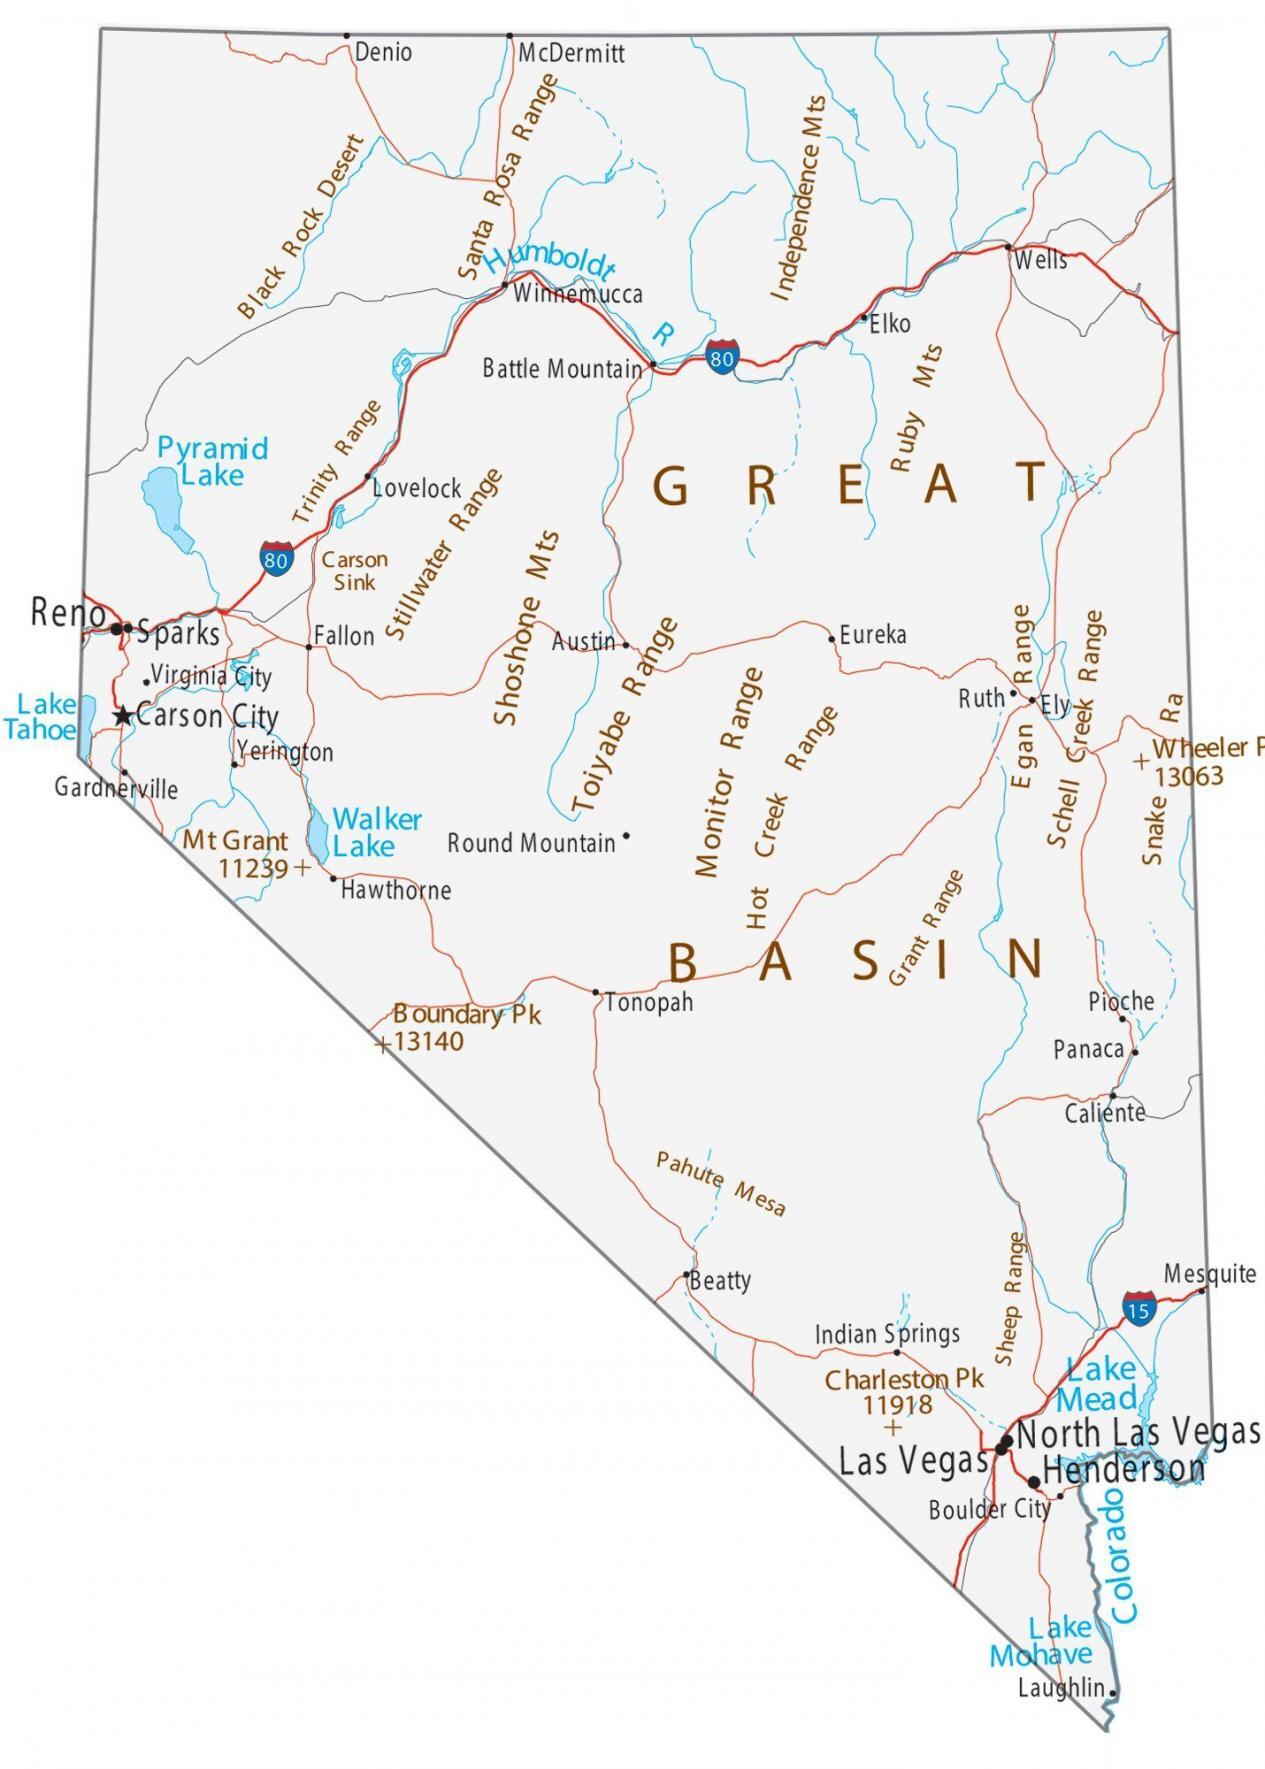 Map of Nevada - Cities and Roads - GIS Geography